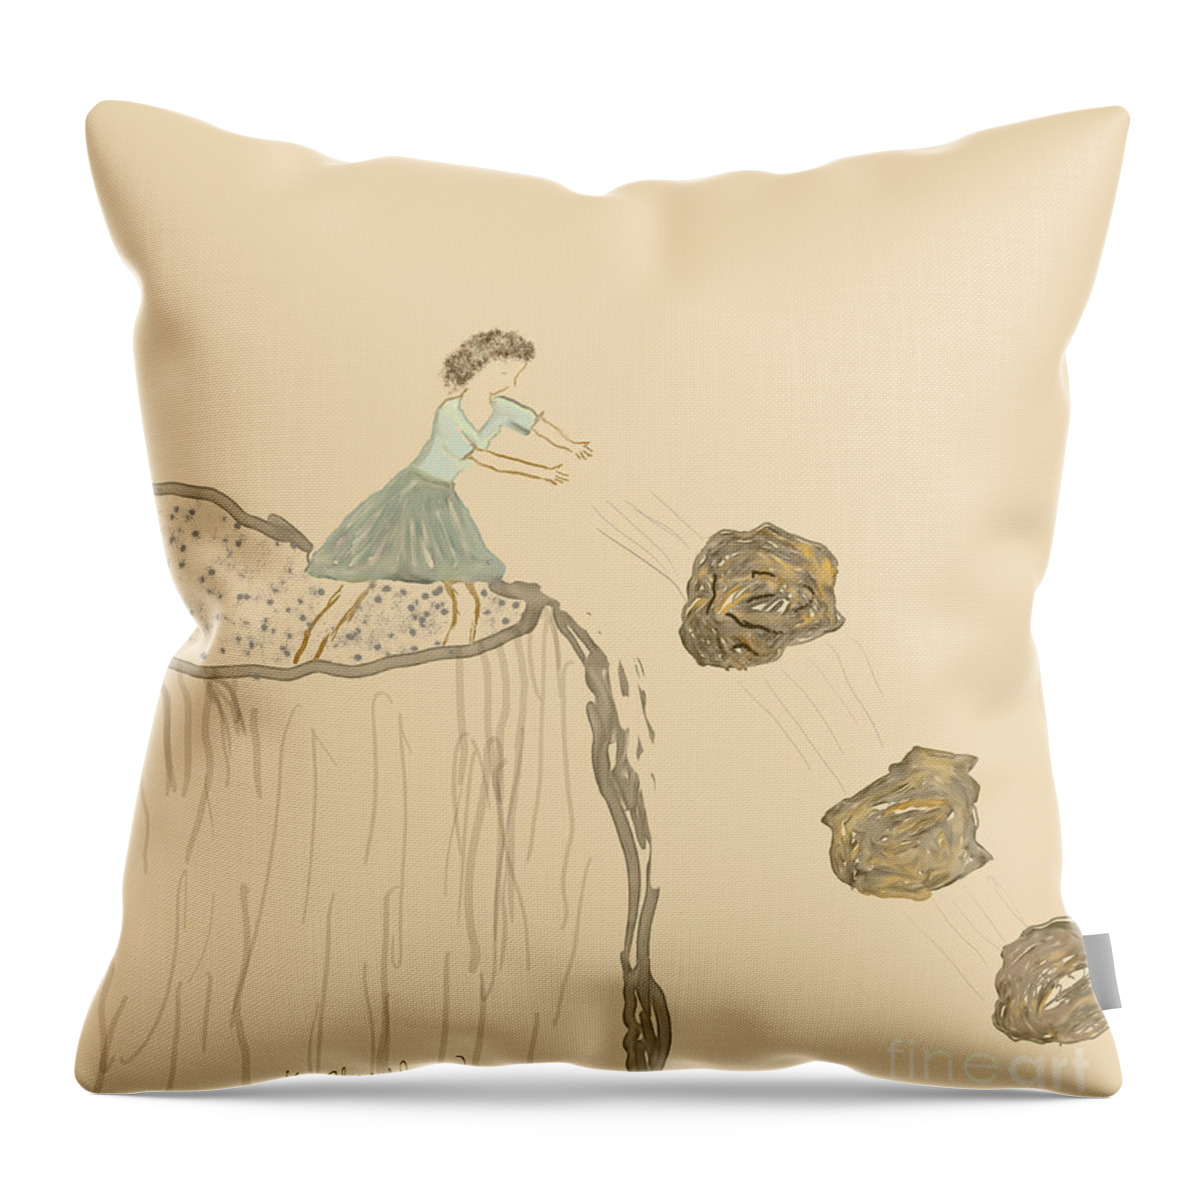 Painting Throw Pillow featuring the digital art Free Up by Kae Cheatham